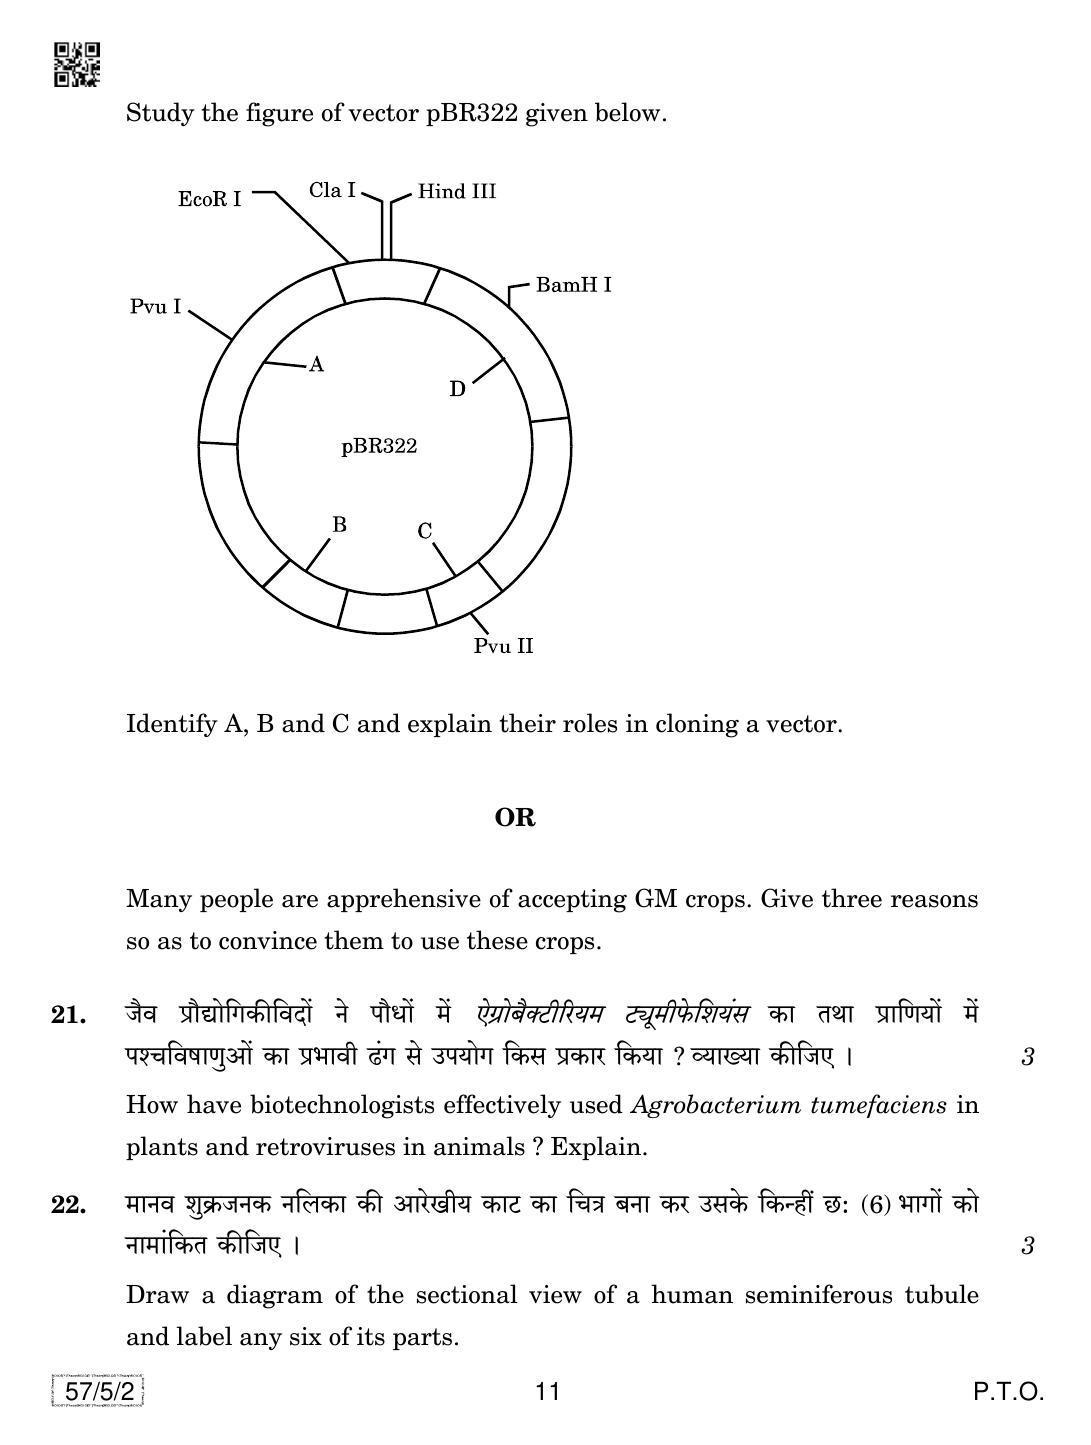 CBSE Class 12 57-5-2 Biology 2019 Question Paper - Page 11